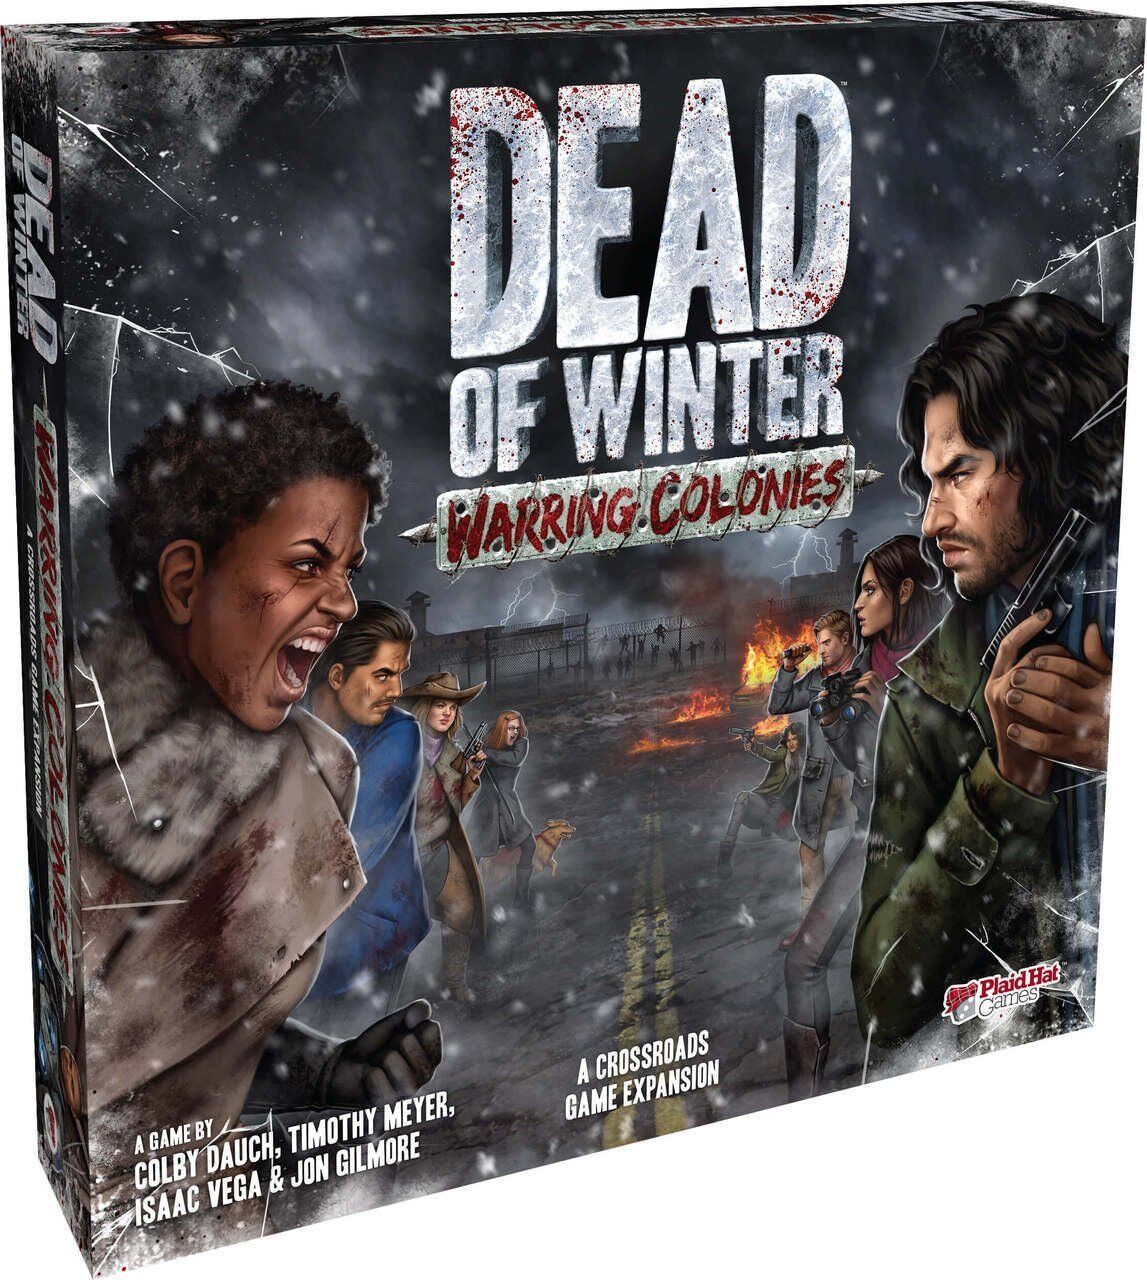 Dead Of Winter Warring Colonies Game Expansion Plaid Hat Games PHG1002 Zombies